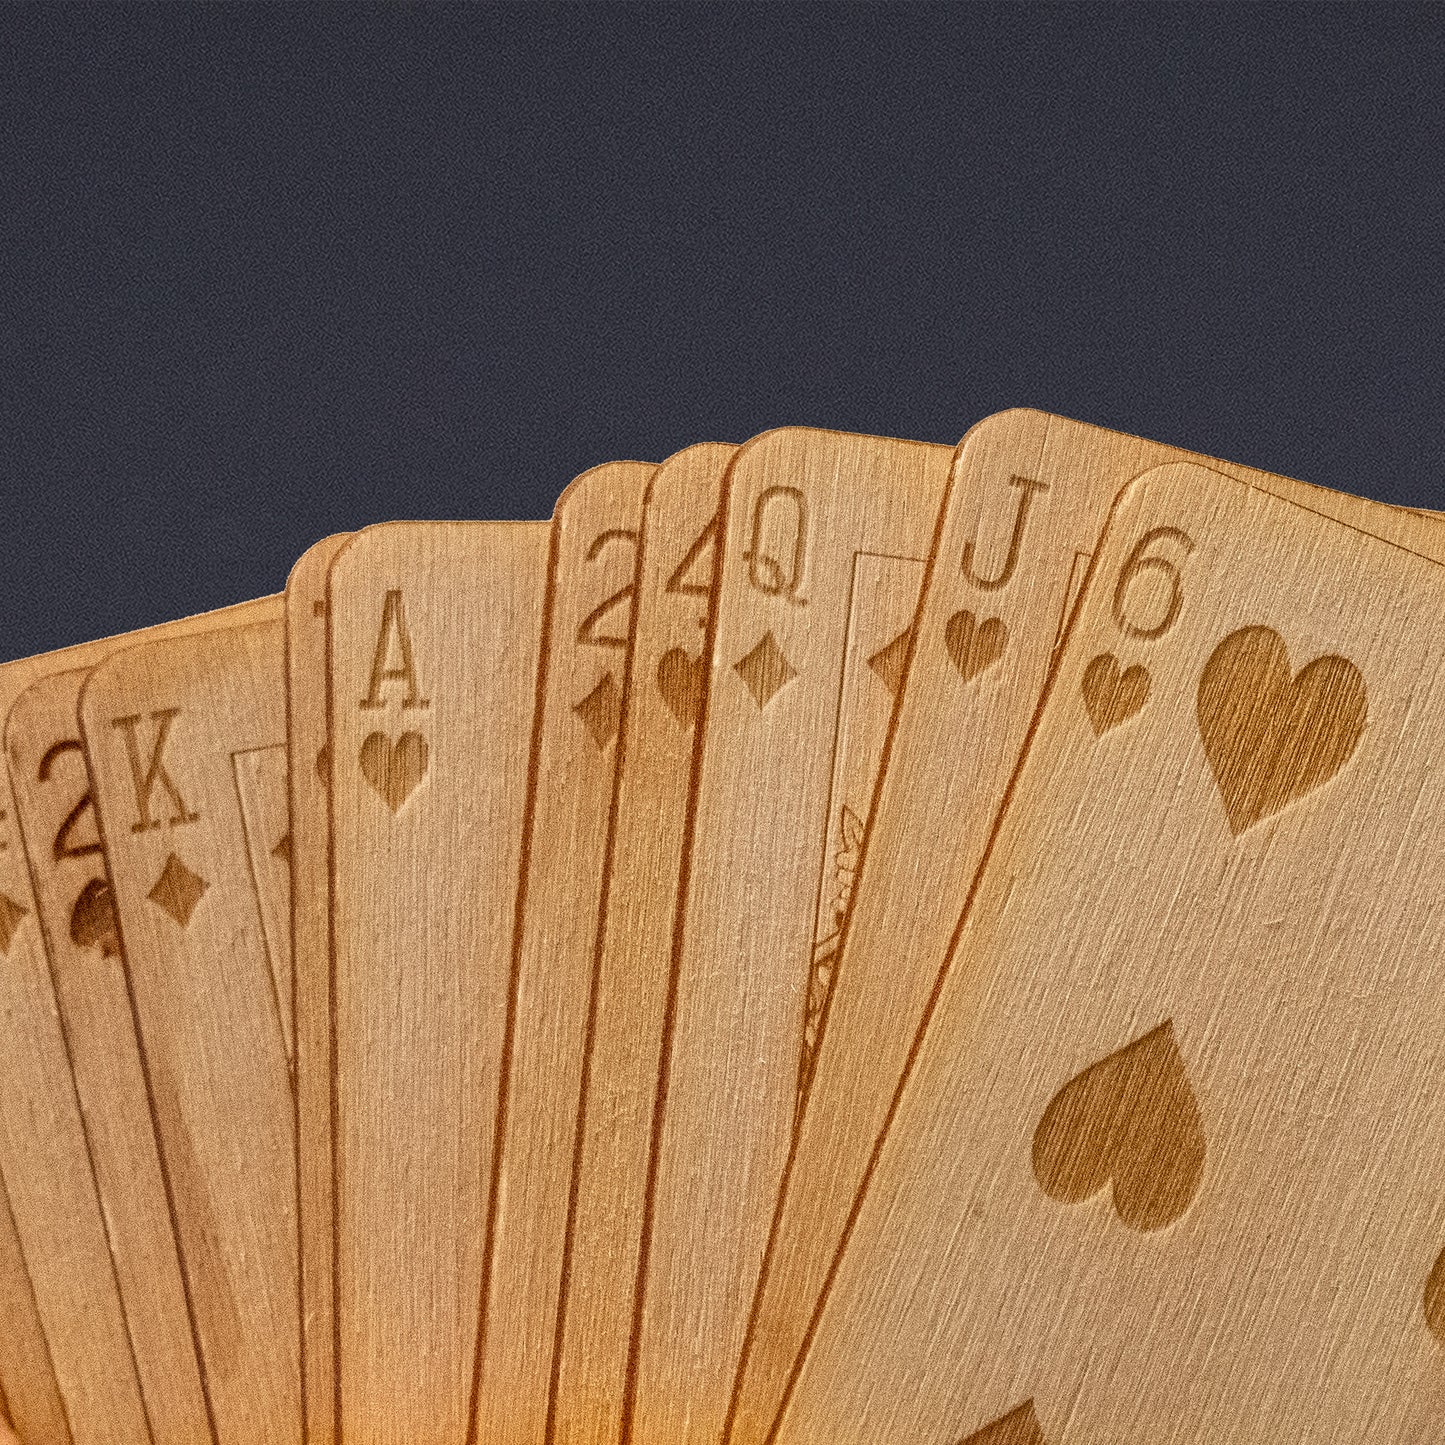 Wooden Playing Card Deck